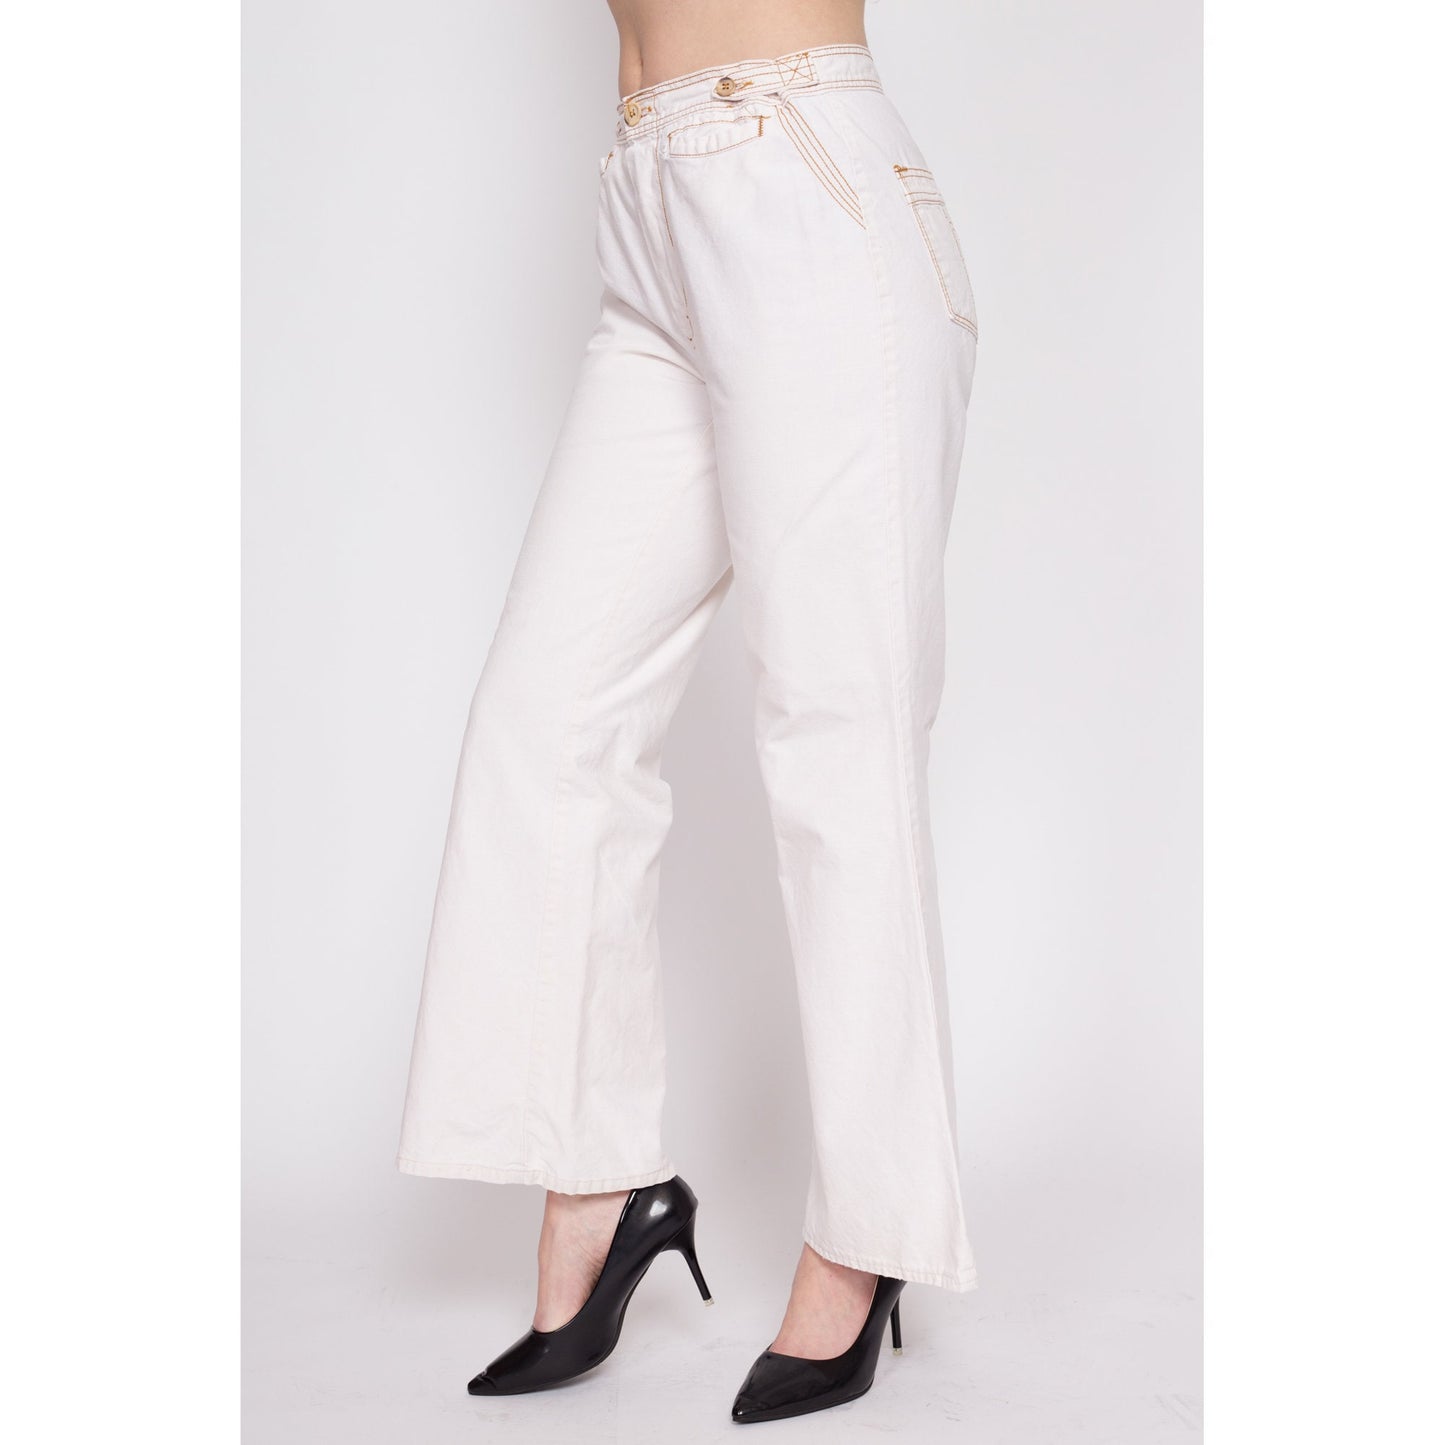 70s White Cotton Contrast Stitch Bell Bottoms - Men's Small, Women's Medium | Vintage Boho High Waisted Flared Pants